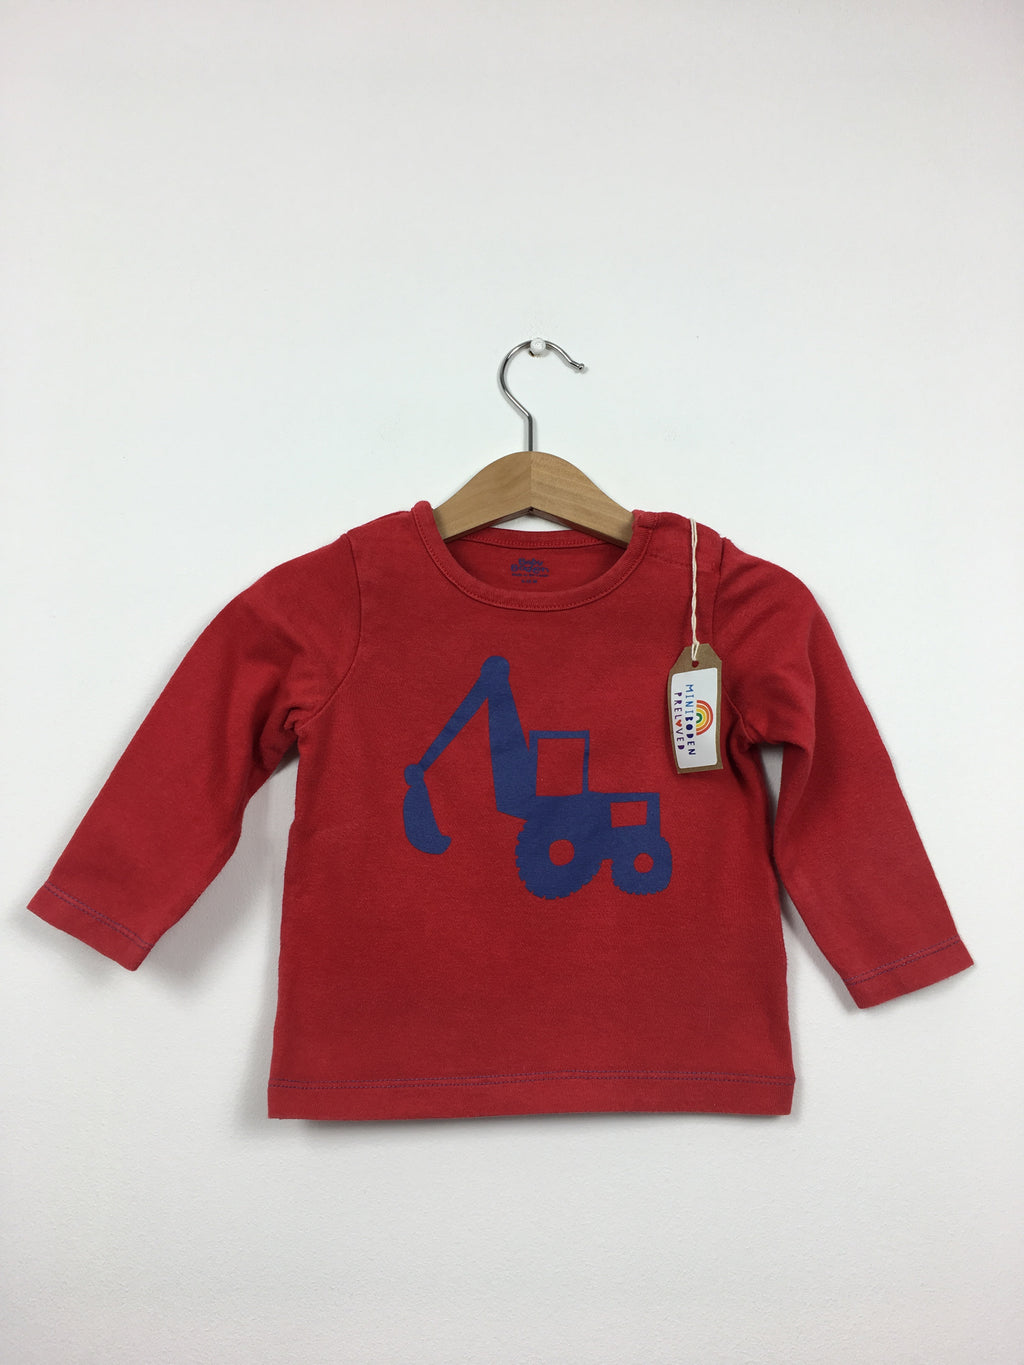 Red Digger Print Top (6-12 Months)